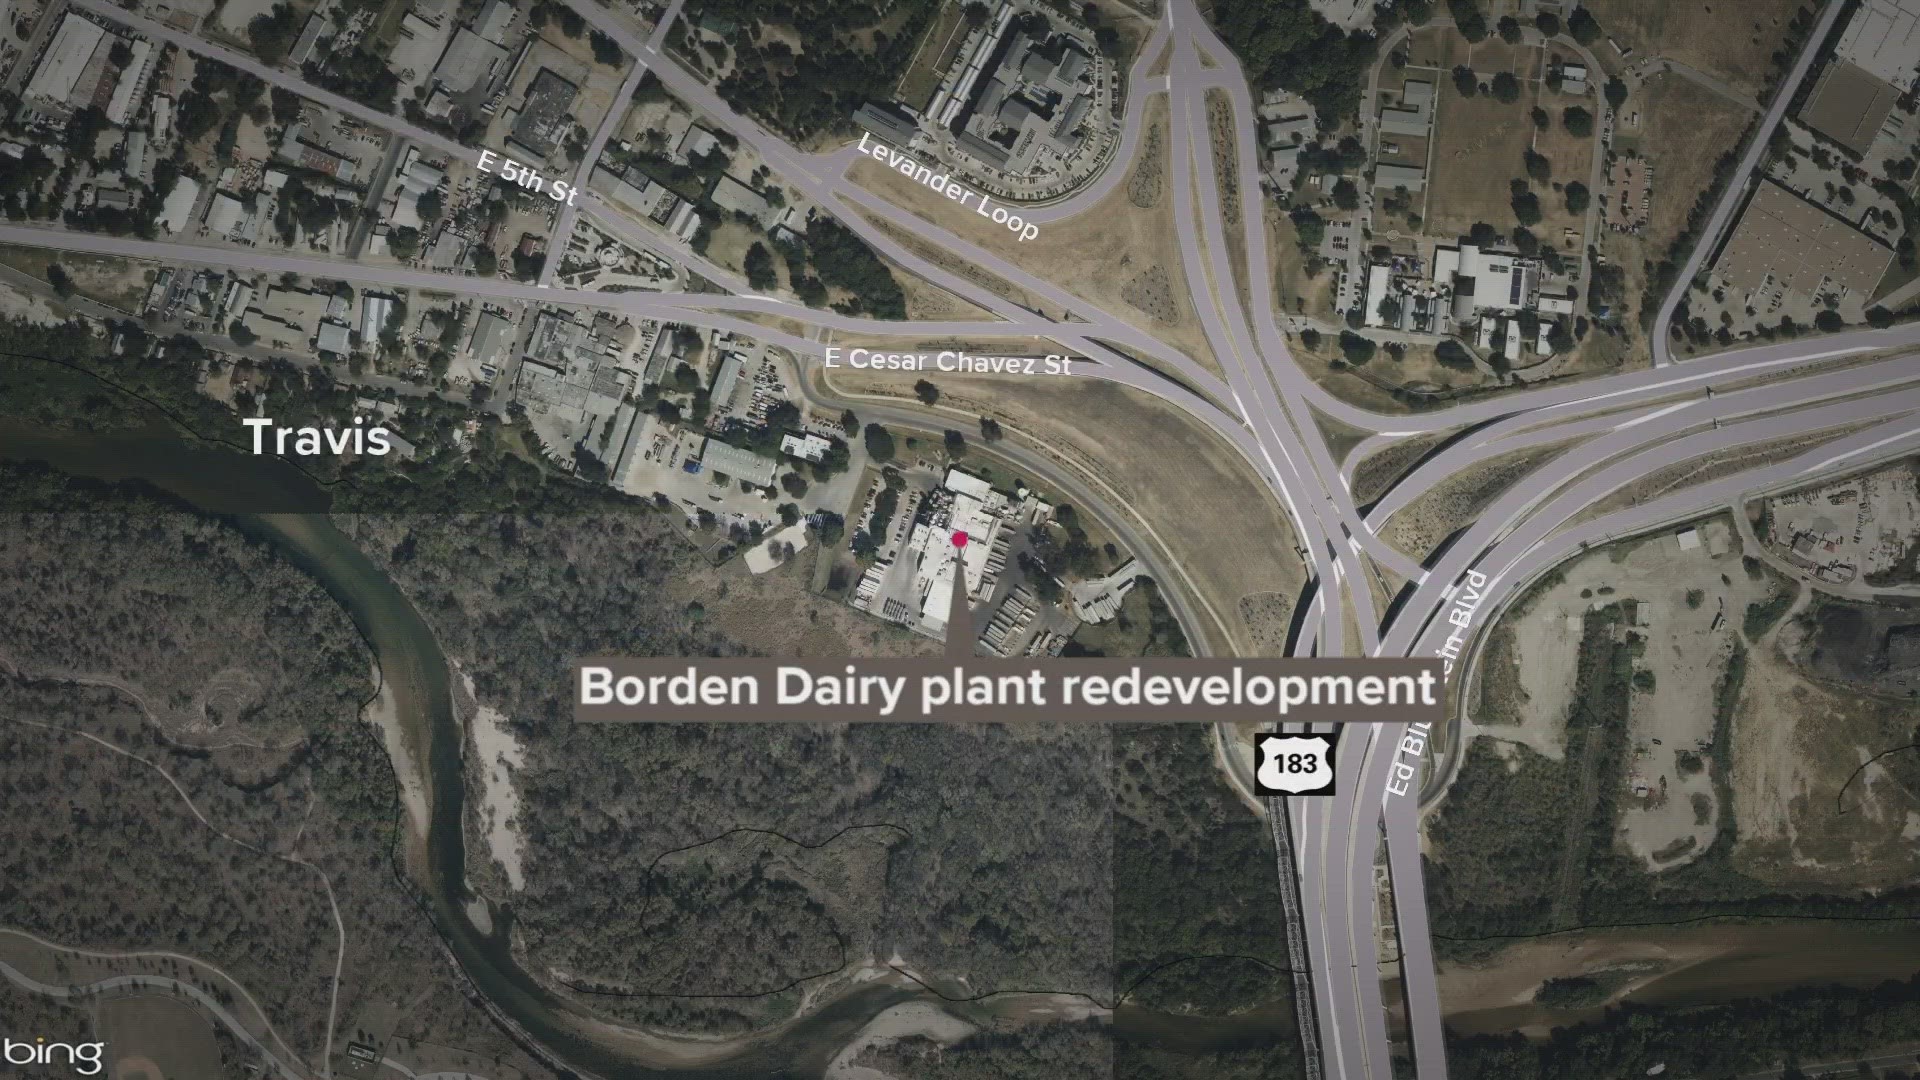 A new development at the Borden Dairy plant in East Austin is nearing approval from the city council.